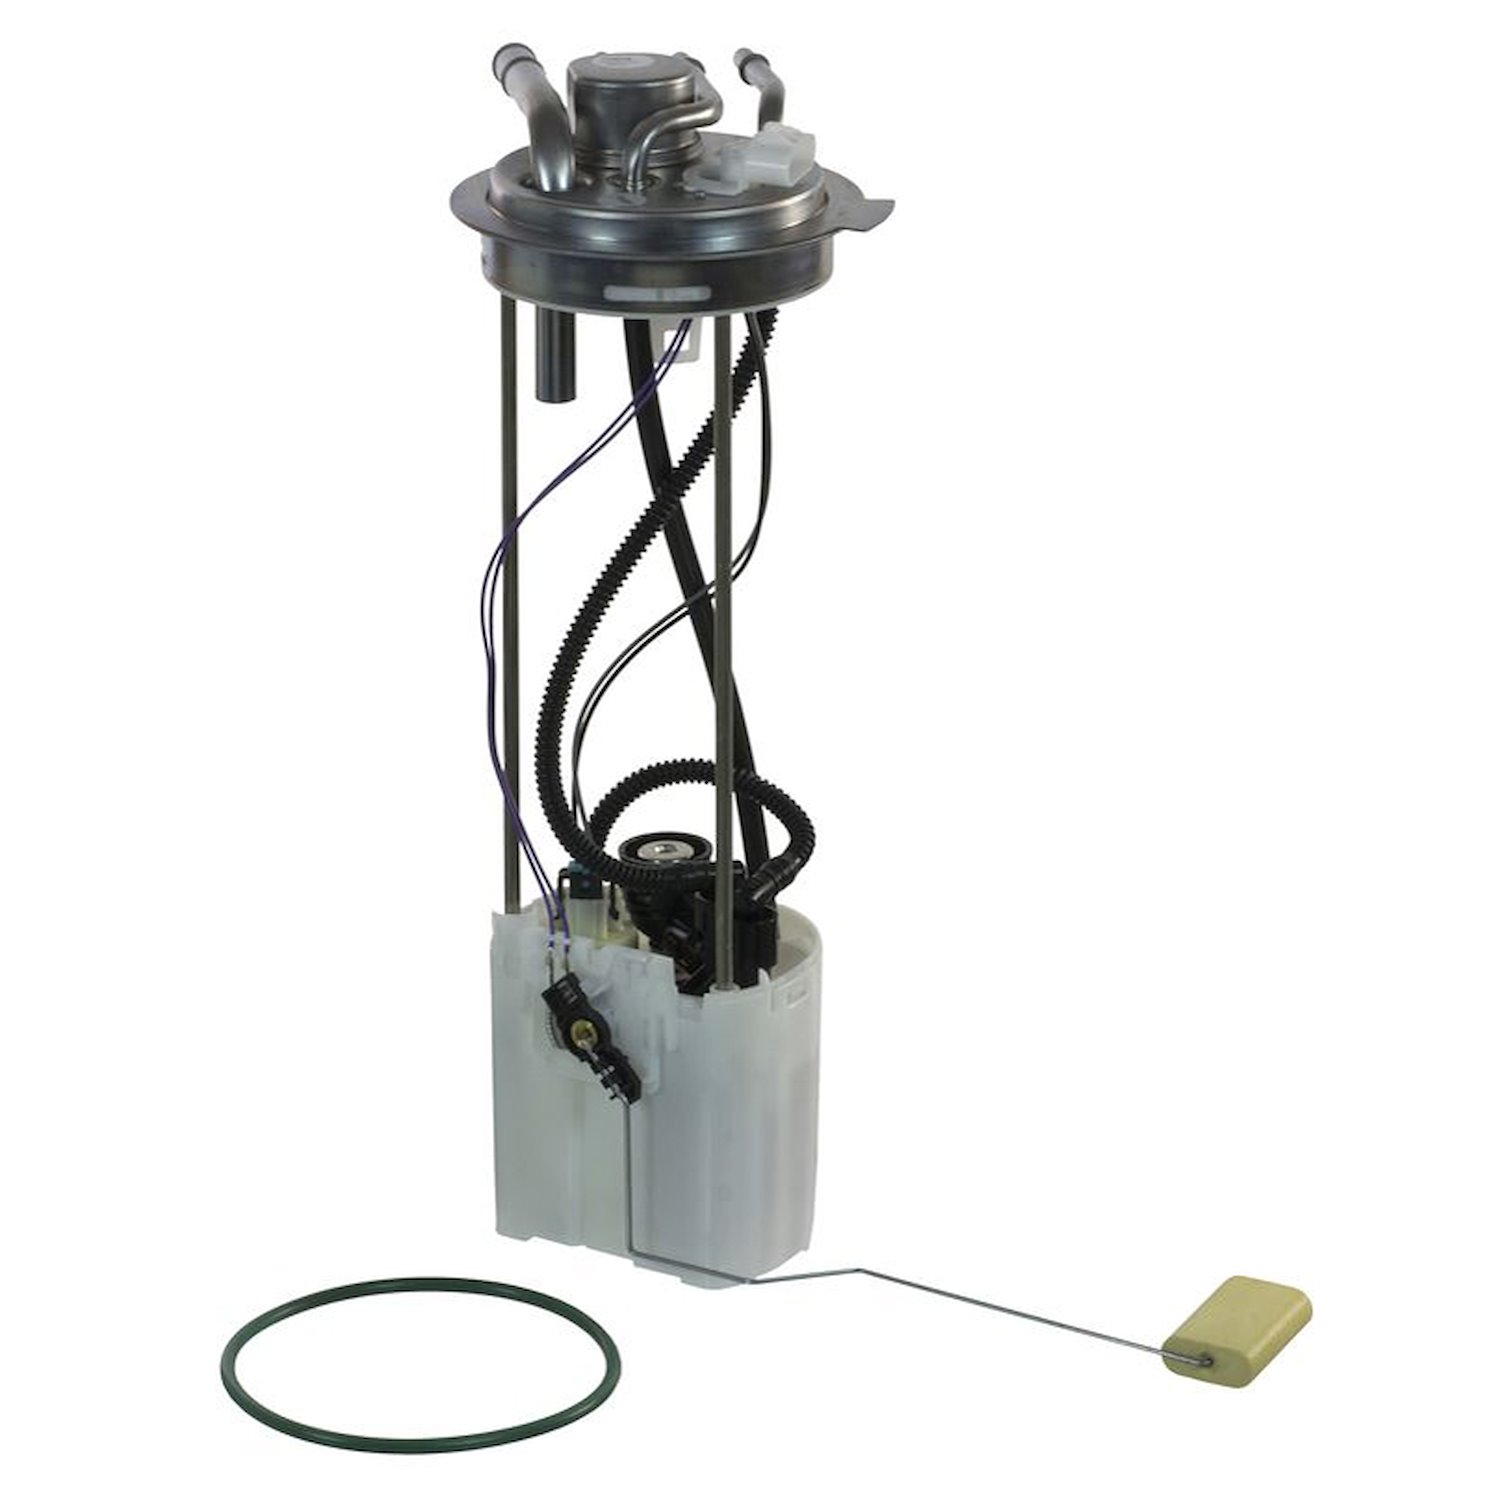 OE GM Replacement Electric Fuel Pump Module Assembly for 2005-2006 Silverado 3500/GMC Sierra 3500